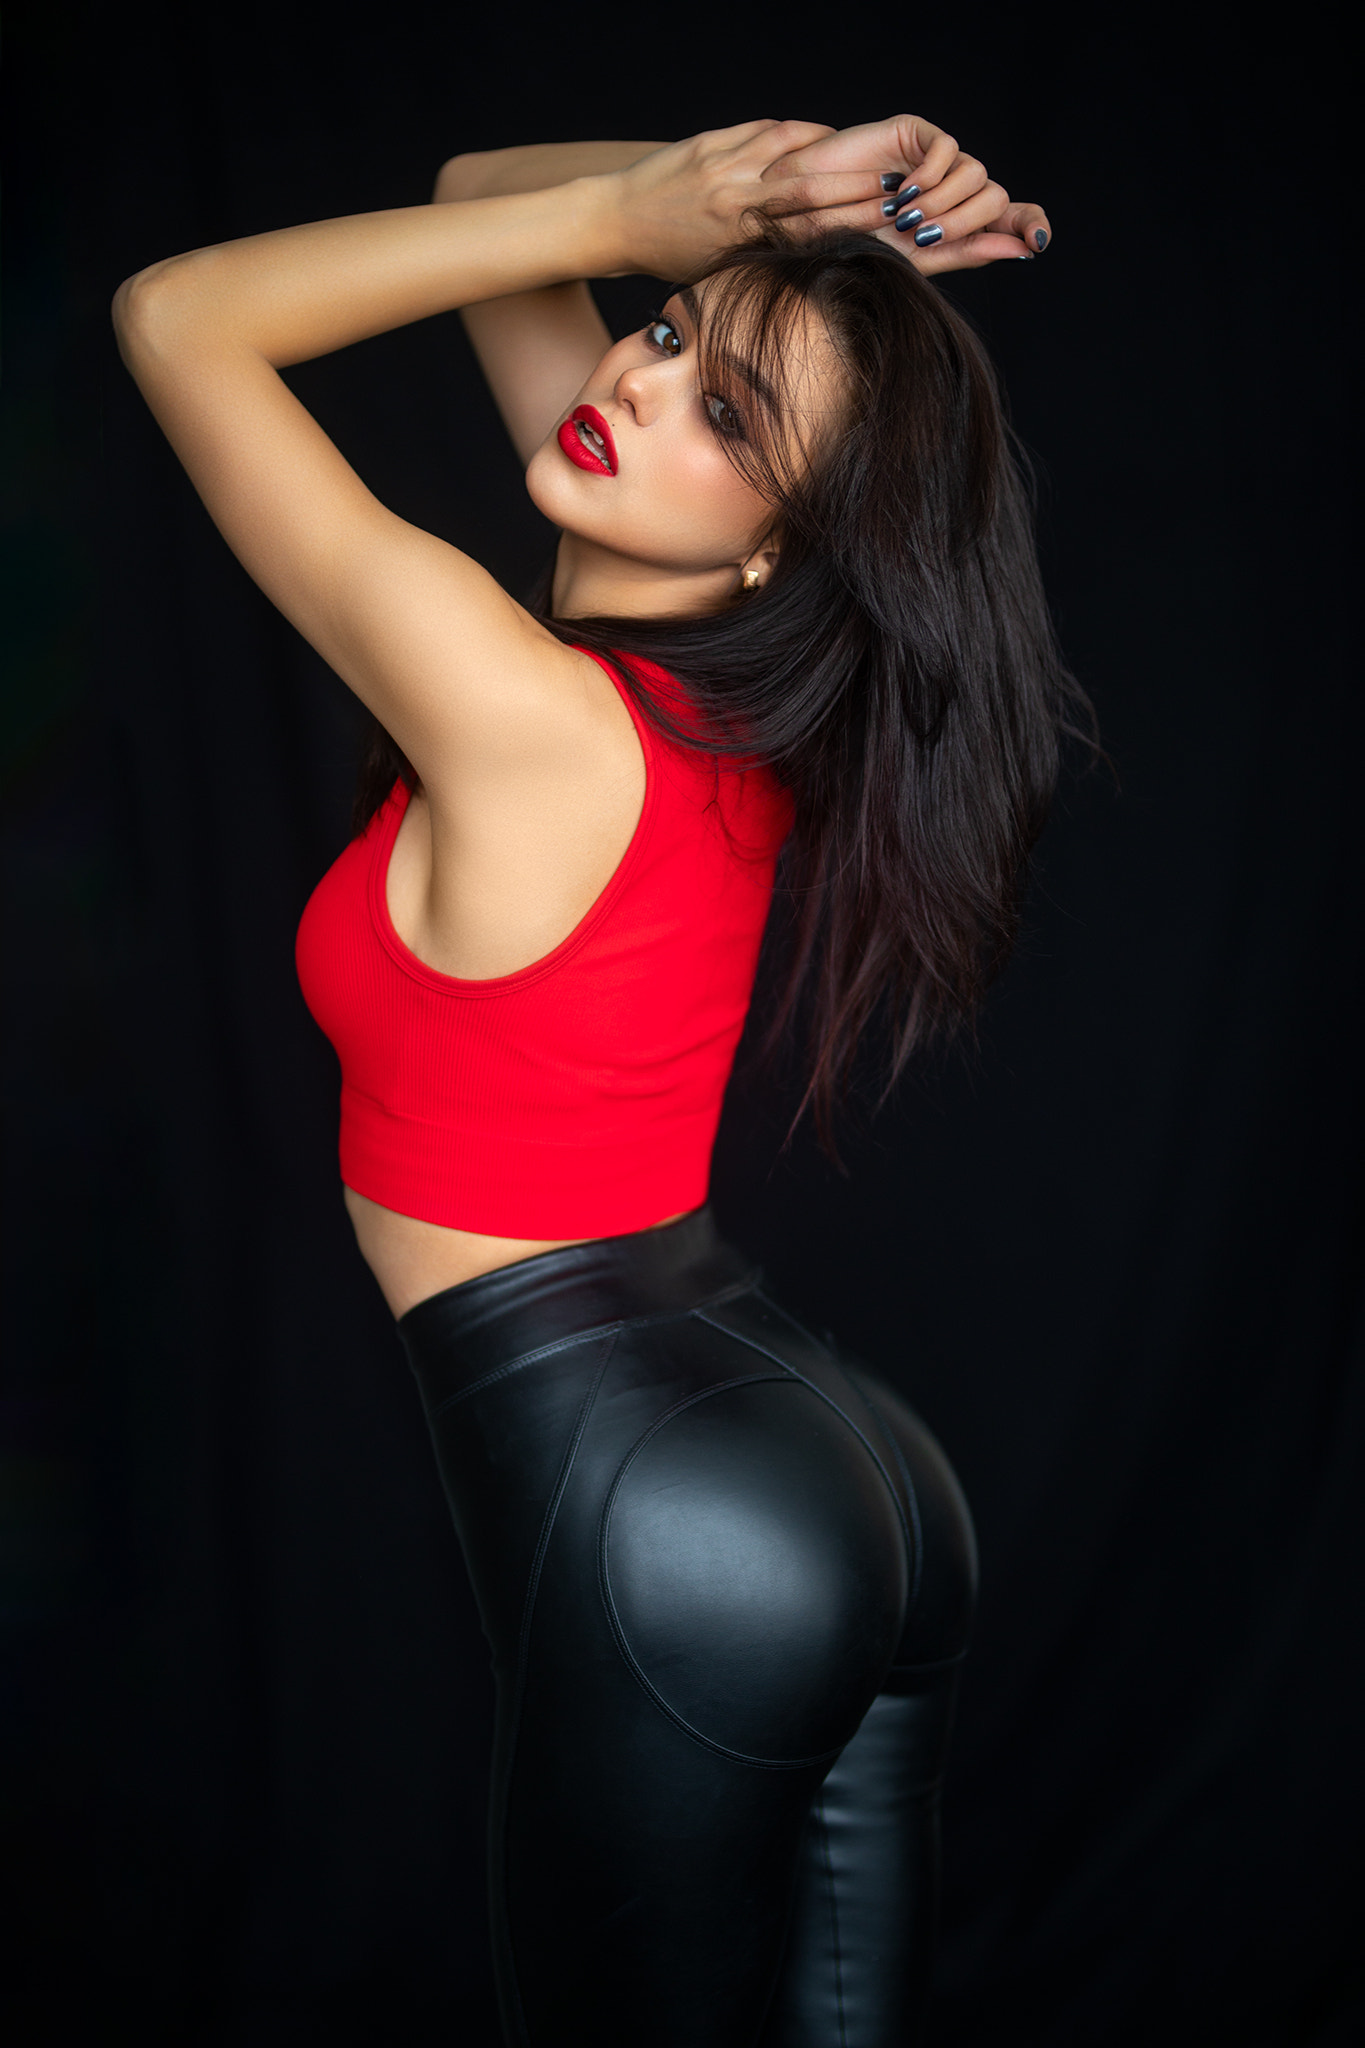 Dmitry Shulgin Women Lipstick Red Leather Arms Up Model Brunette Red Lipstick Parted Lips Armpits Re 1365x2048